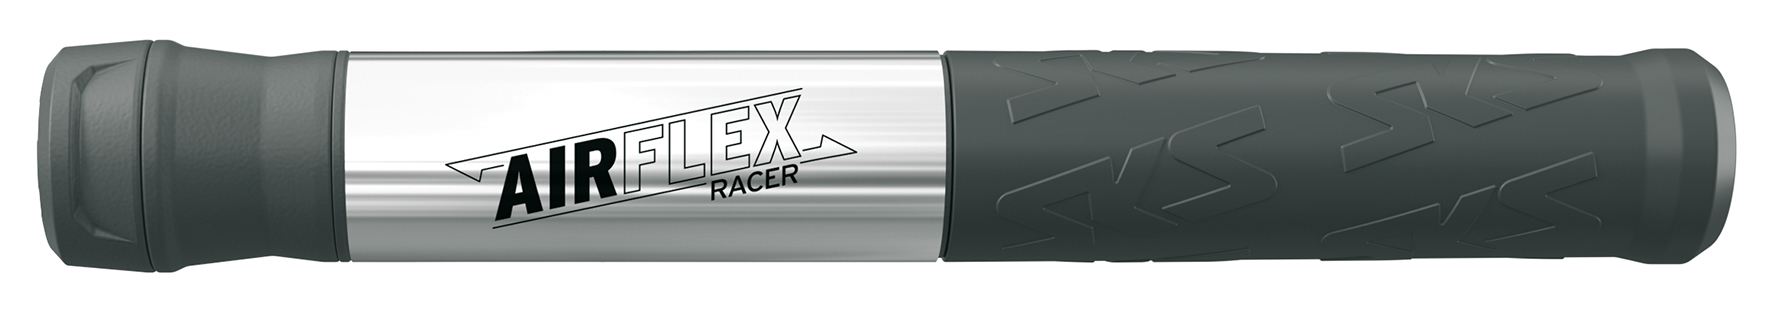 RS4118_11604_AIRFLEX_RACER_SILVER_side